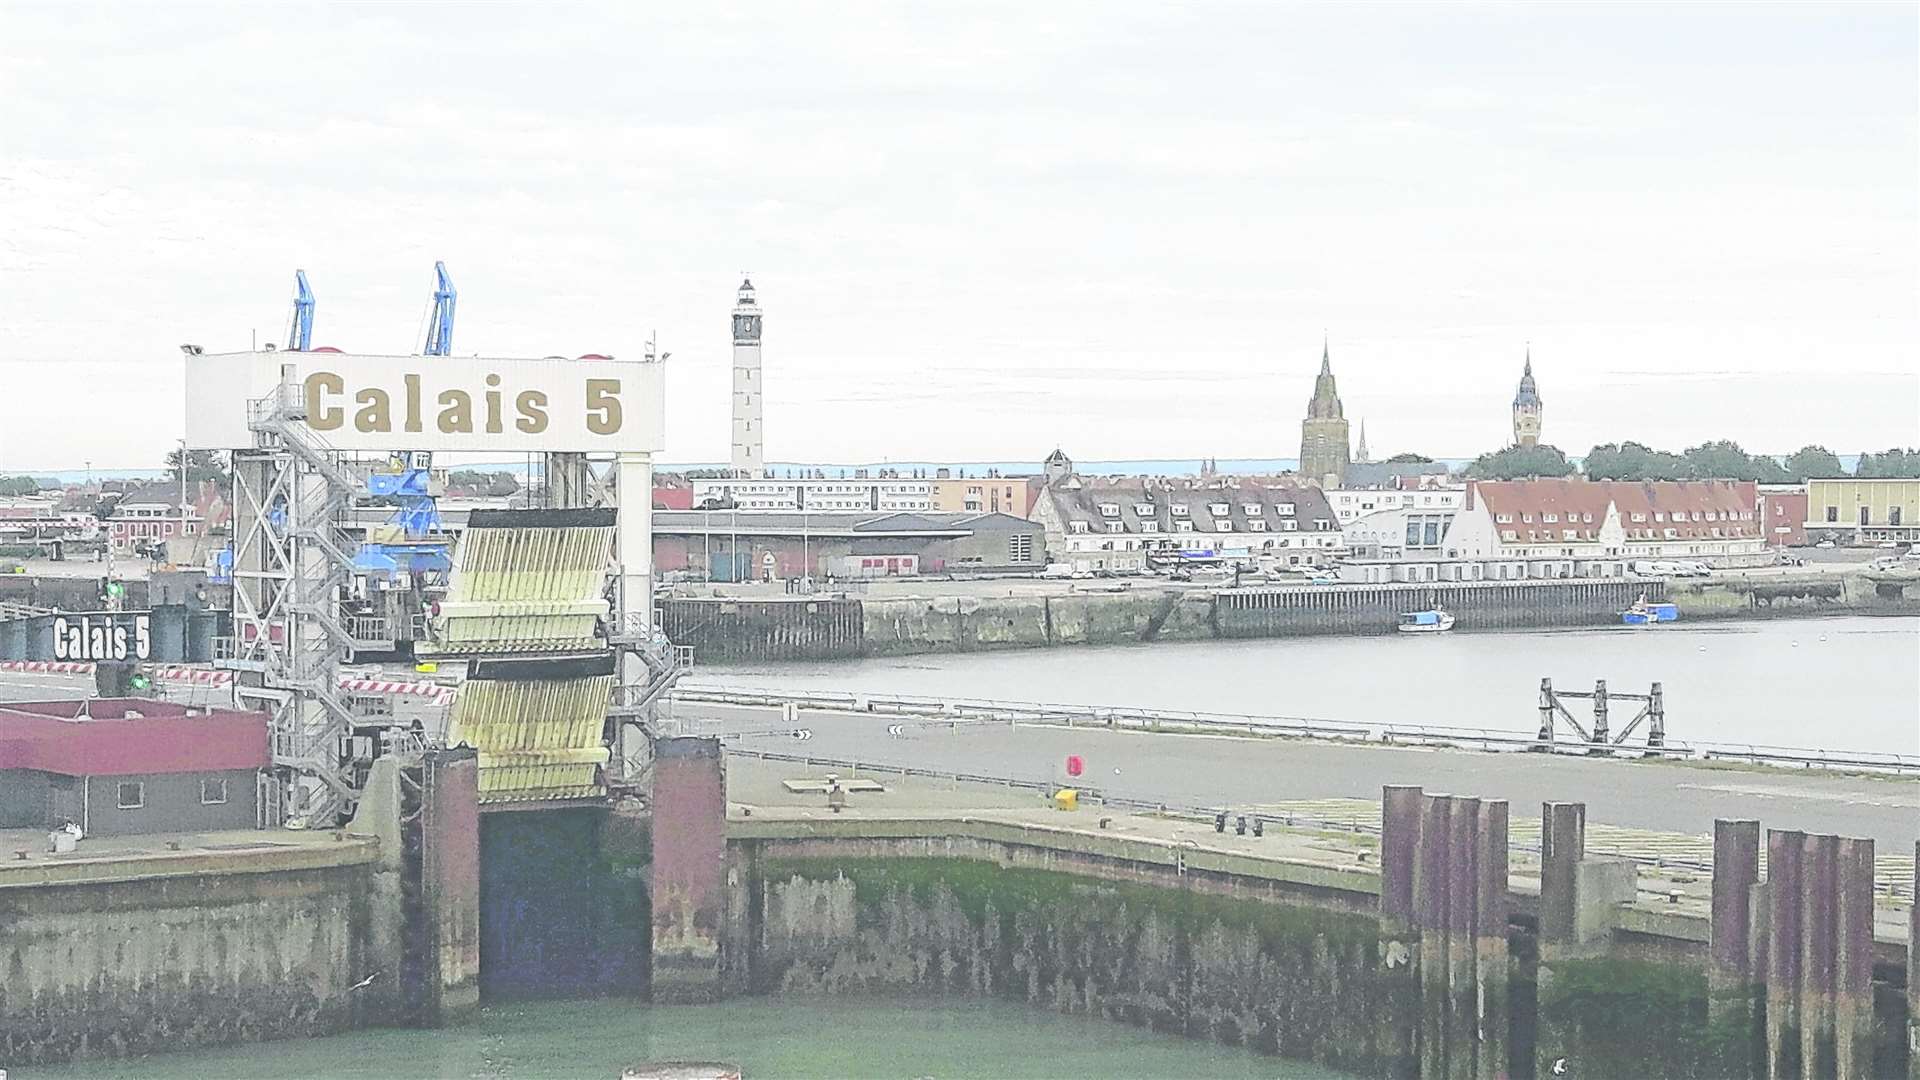 There has been a security scare at the Port of Calais